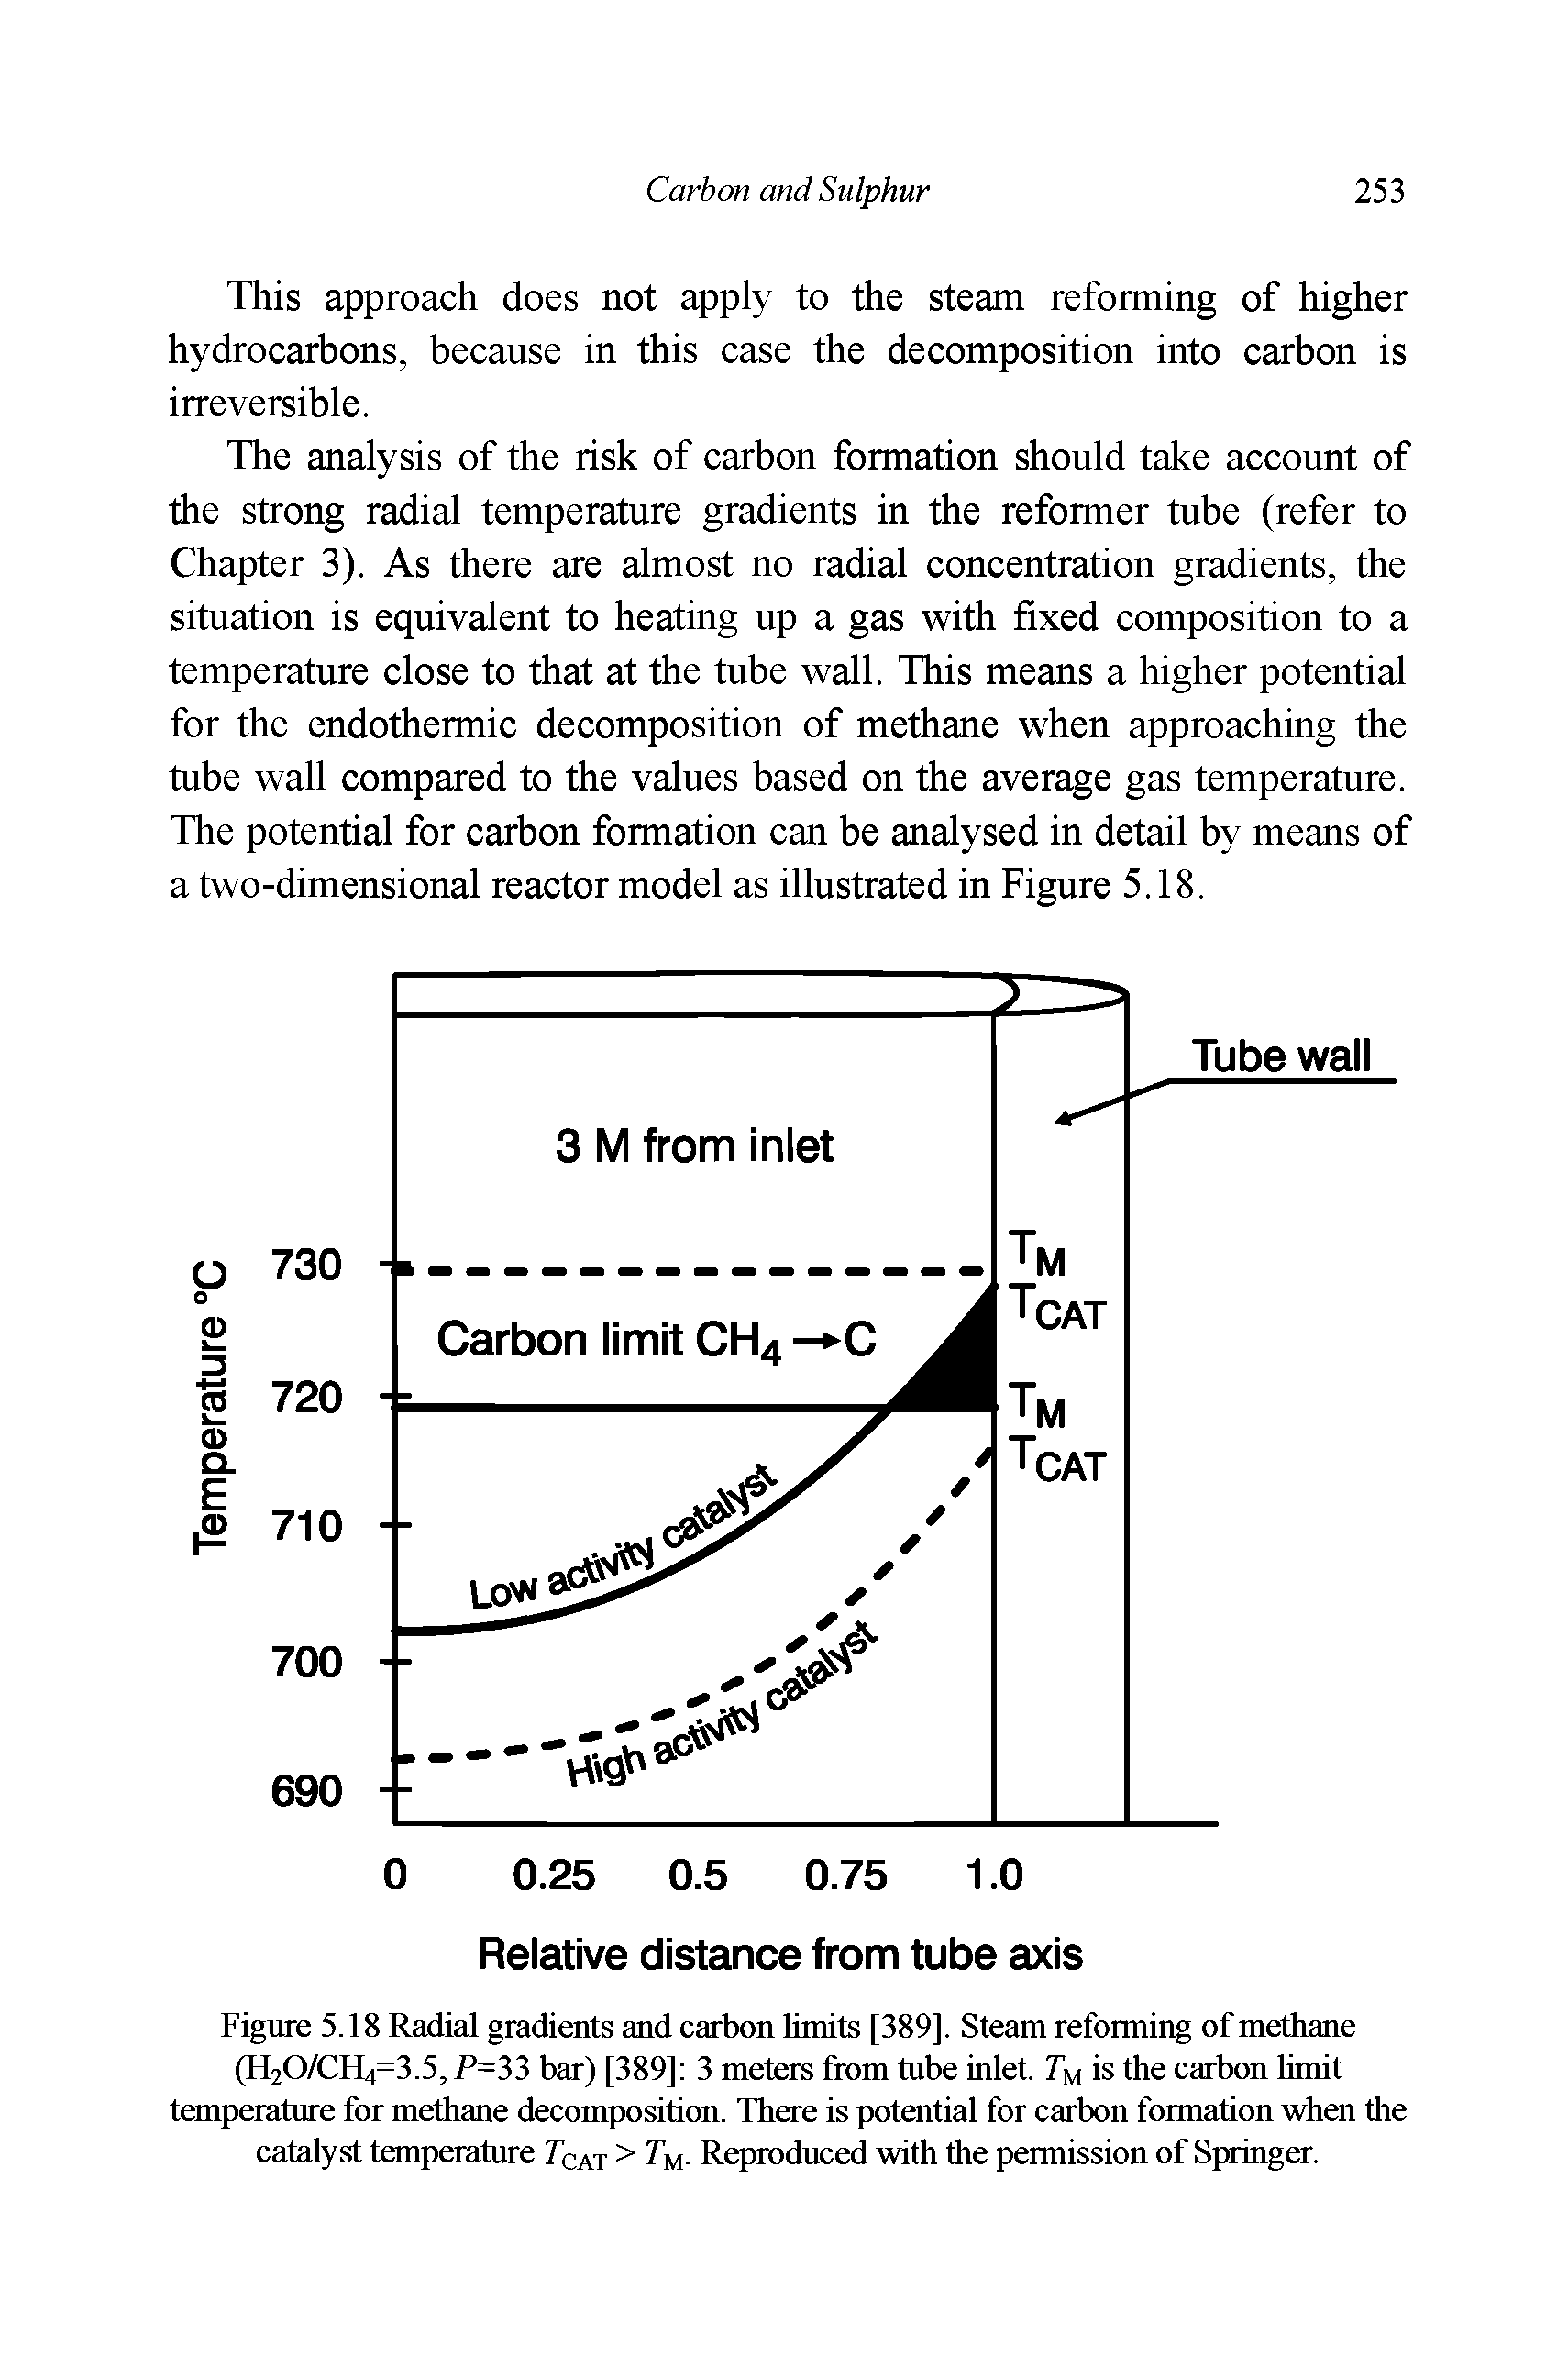 Figure 5.18 Radial gradients and carbon limits [389]. Steam reforming of methane (H20/CH4=3.5, F=33 bar) [389] 3 meters from tube inlet. Tu is the carbon limit temperature for methane decomposition. There is potential for carbon formation when the catalyst temperature Tcat > m. Reproduced with the permission of Springer.